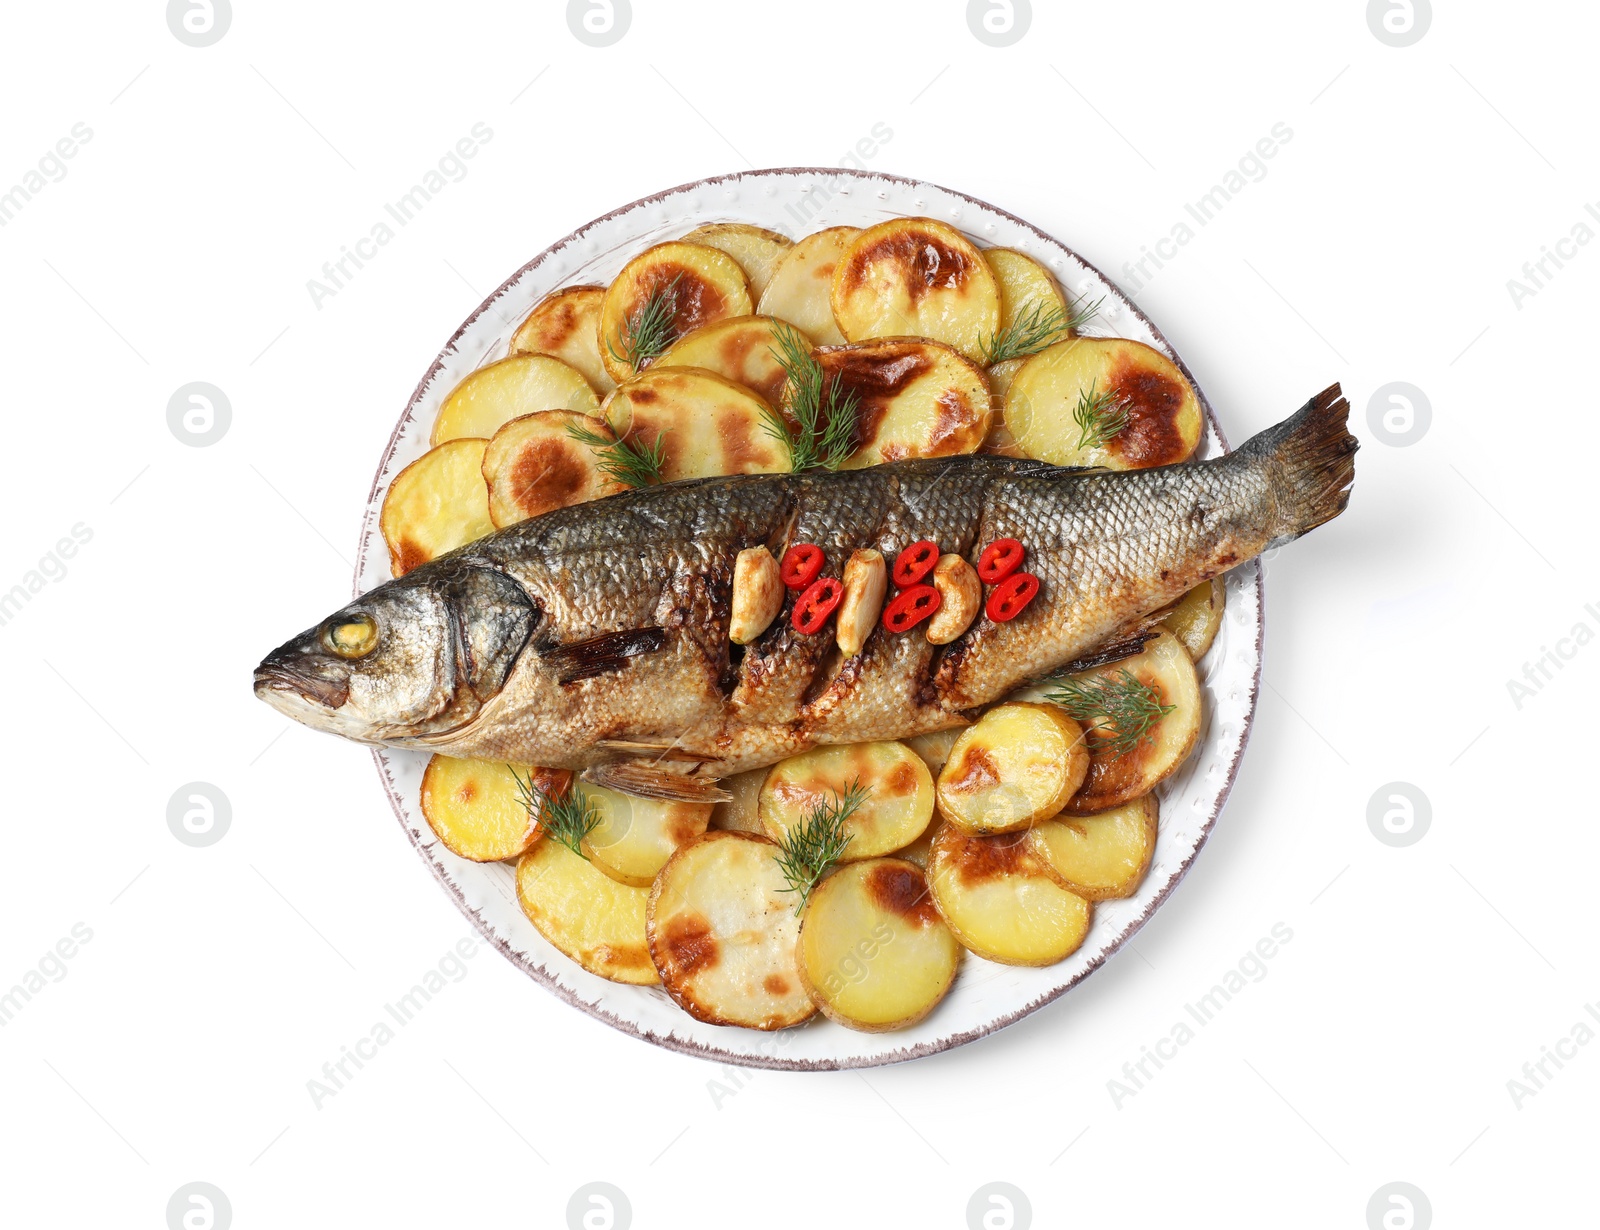 Photo of Plate with delicious roasted sea bass fish and potatoes on white background, top view